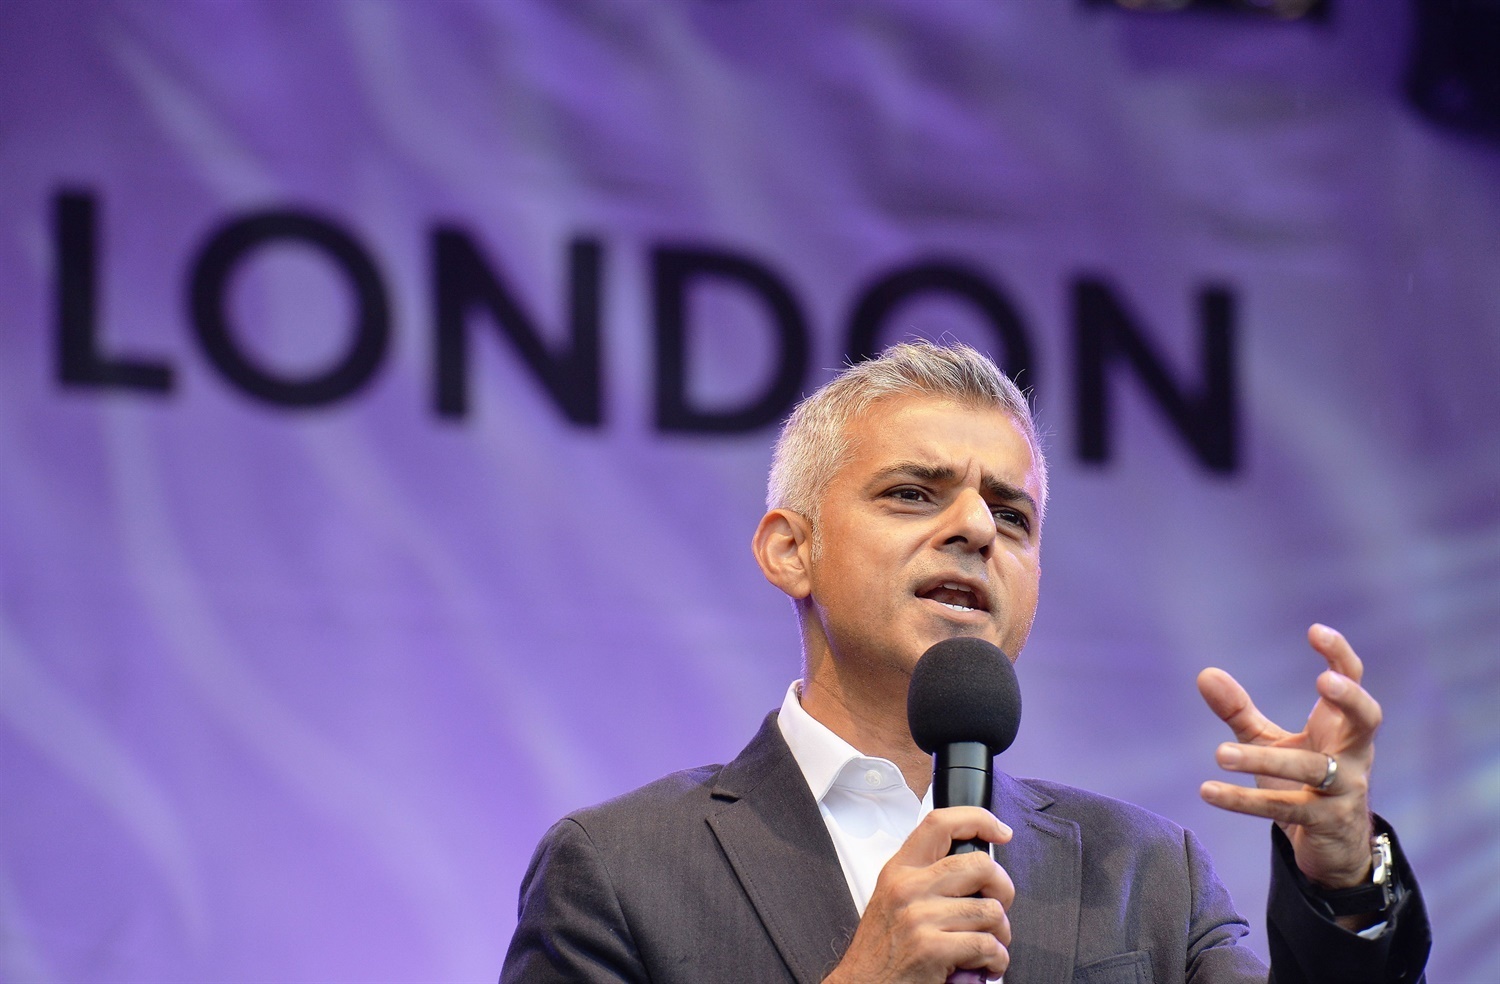 London network will ‘grind to a halt’ without Crossrail 2, warns Khan